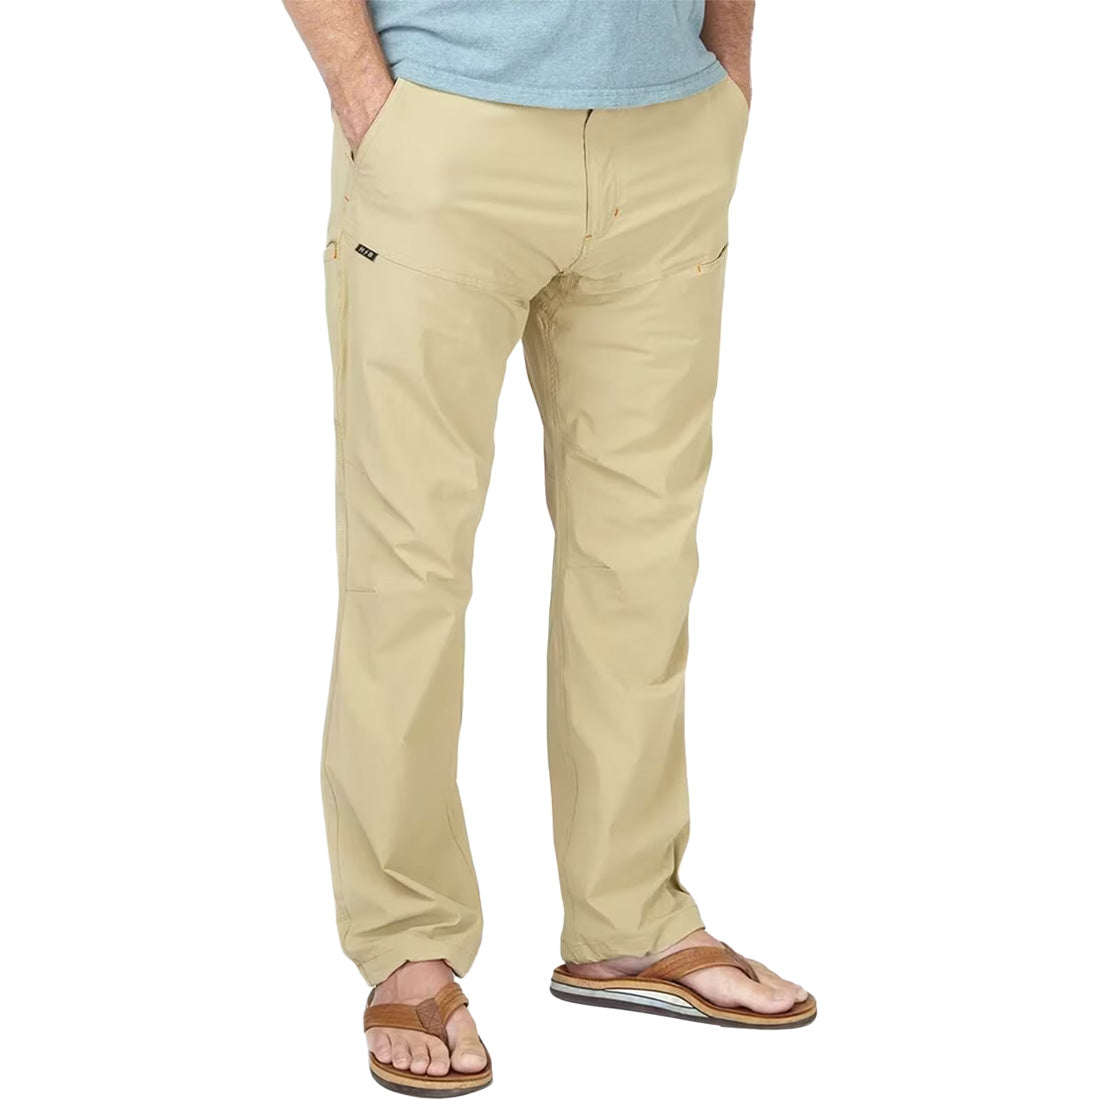 Howler Brothers Shoalwater Tech Pant - Men's